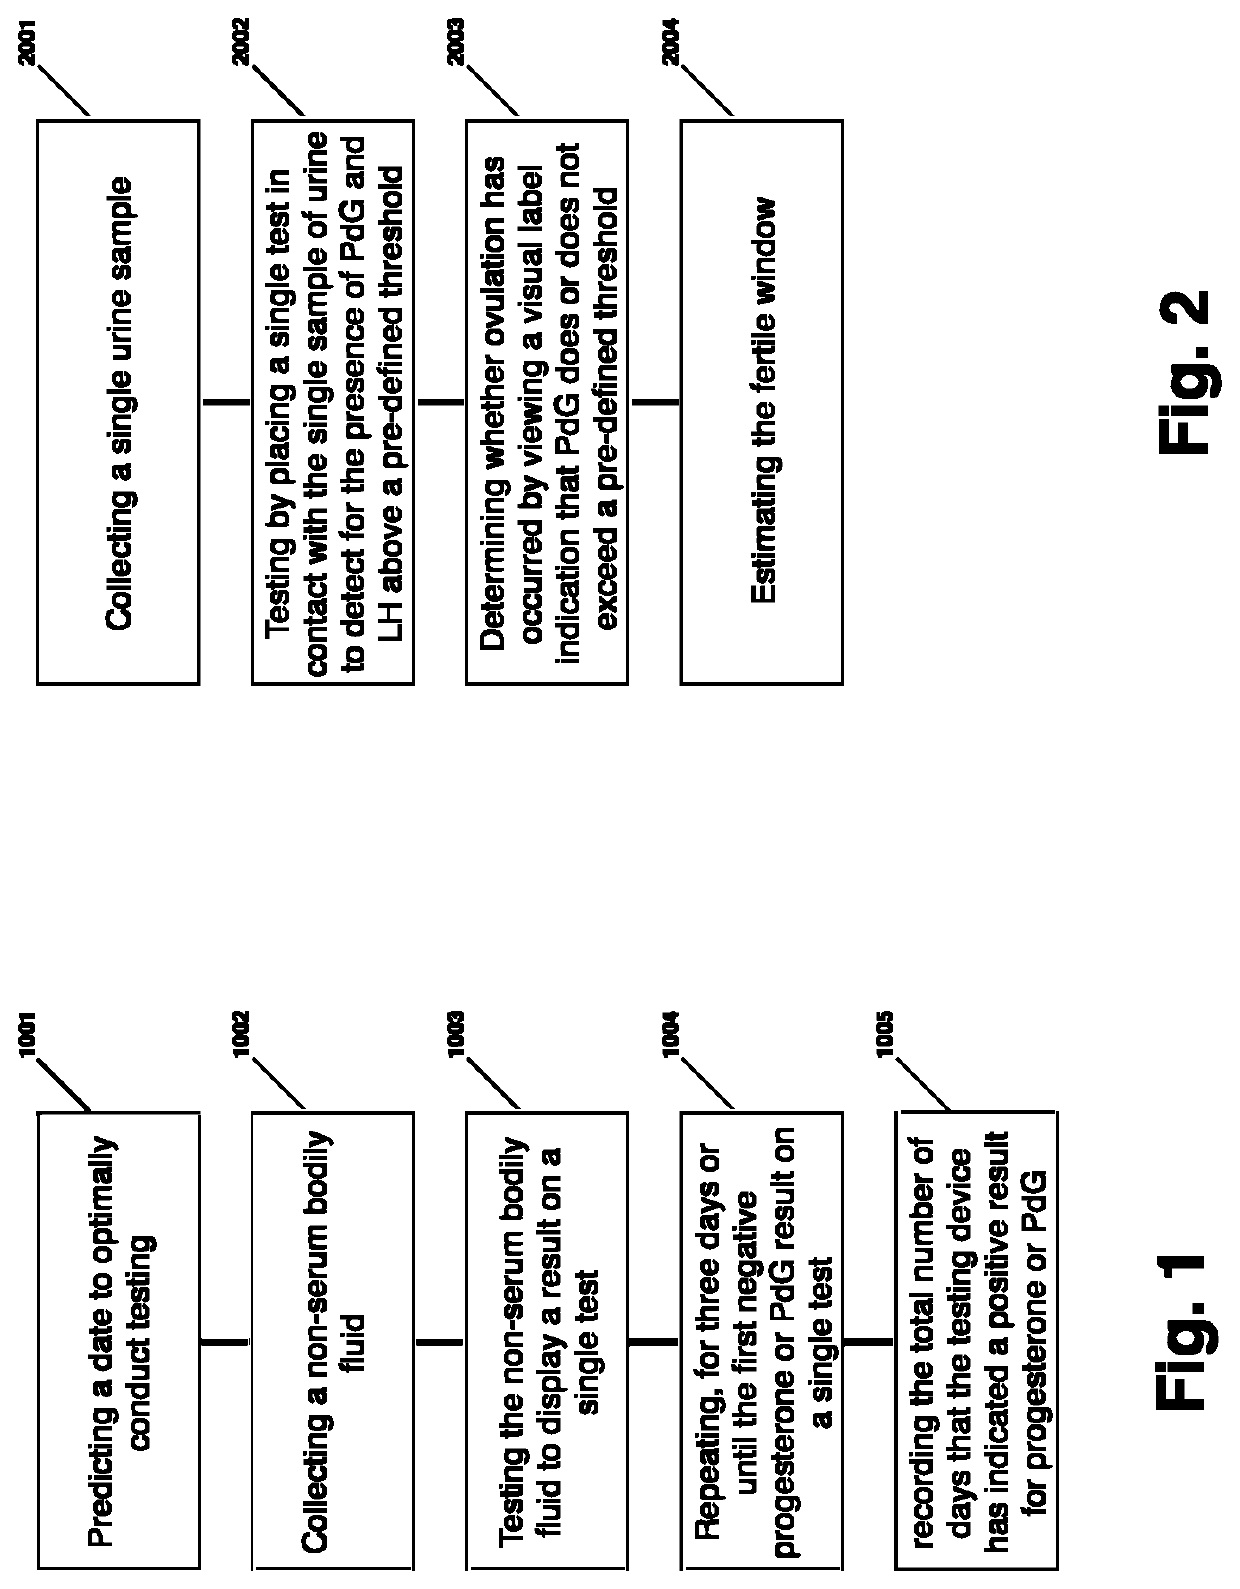 Method for evaluating urine of a subject to estimate the fertile window by evaluating for the presence of analytes of estrogen and progesterone